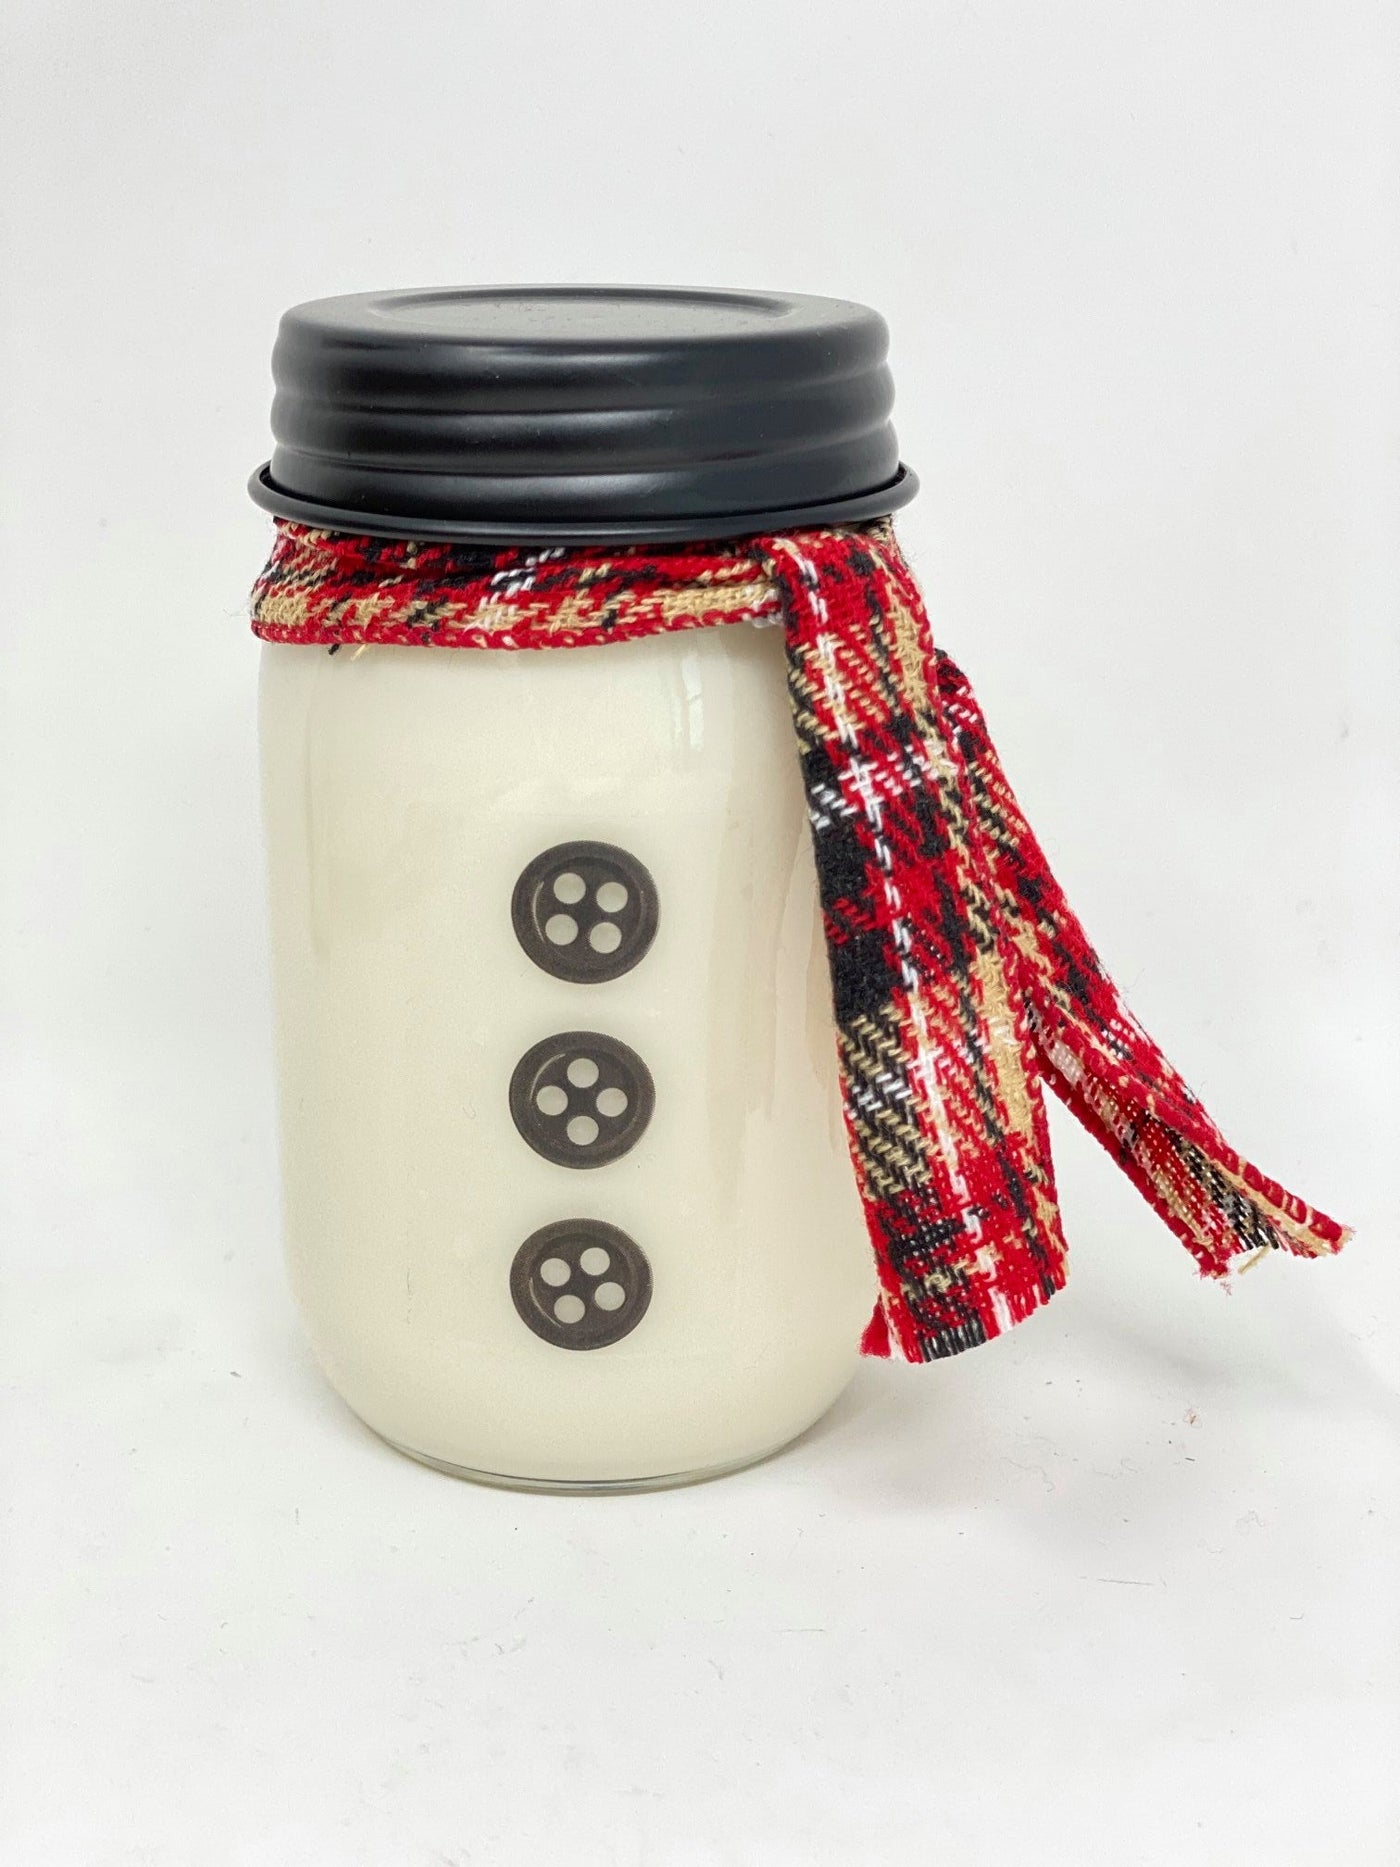 Snowman Christmas Candles - 100 Hour Burn Time Soy Wax Candles - Oily BlendsSnowman Christmas Candles - 100 Hour Burn Time Soy Wax Candles